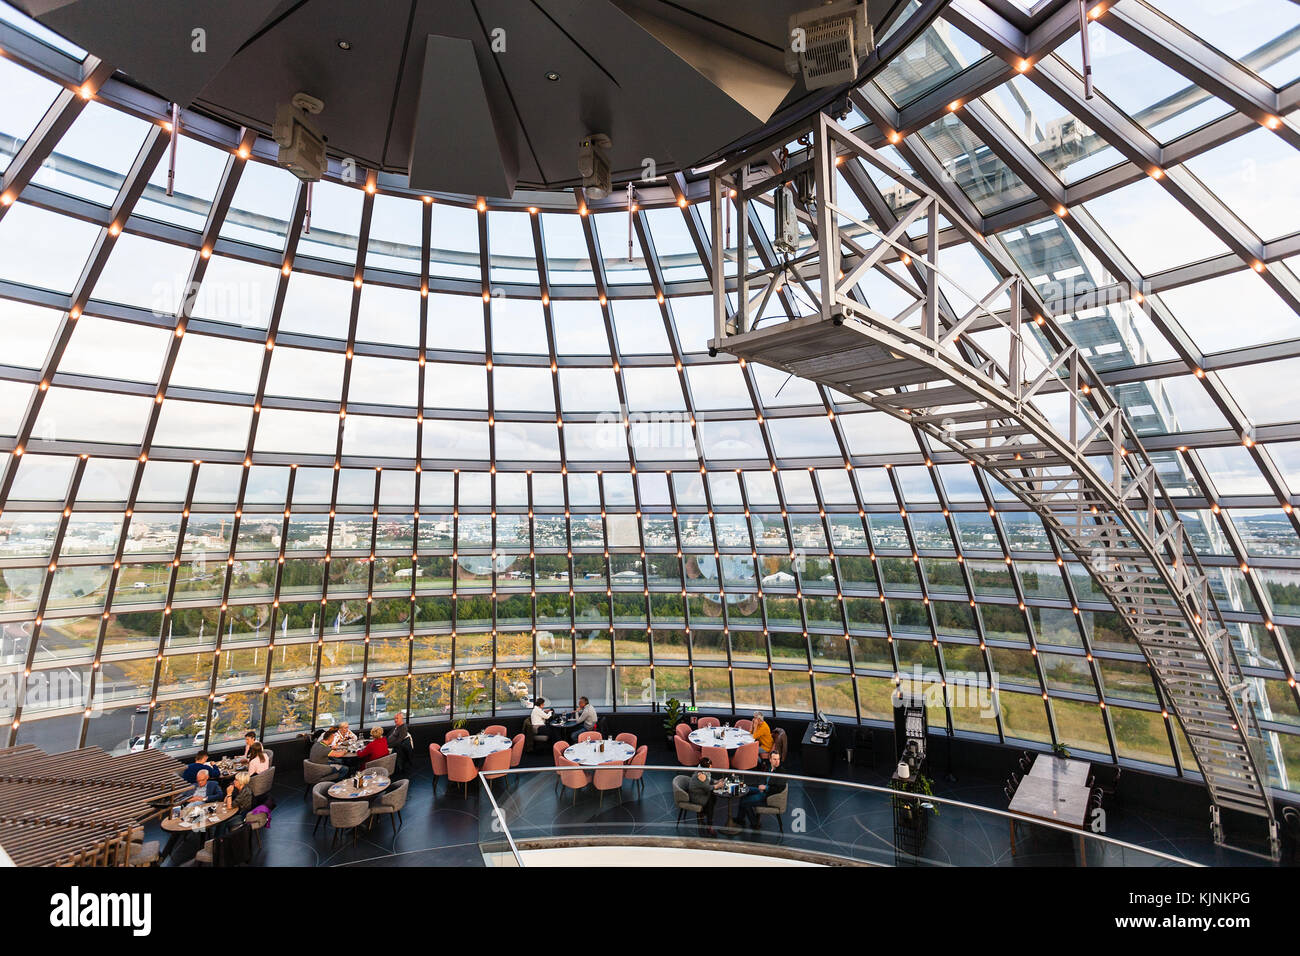 REYKJAVIC, ICELAND - SEPTEMBER 7, 2017: people in cafe inside glass dome on Observation Deck of Perlan Museum in Reykjavik city in evening. The Perlan Stock Photo